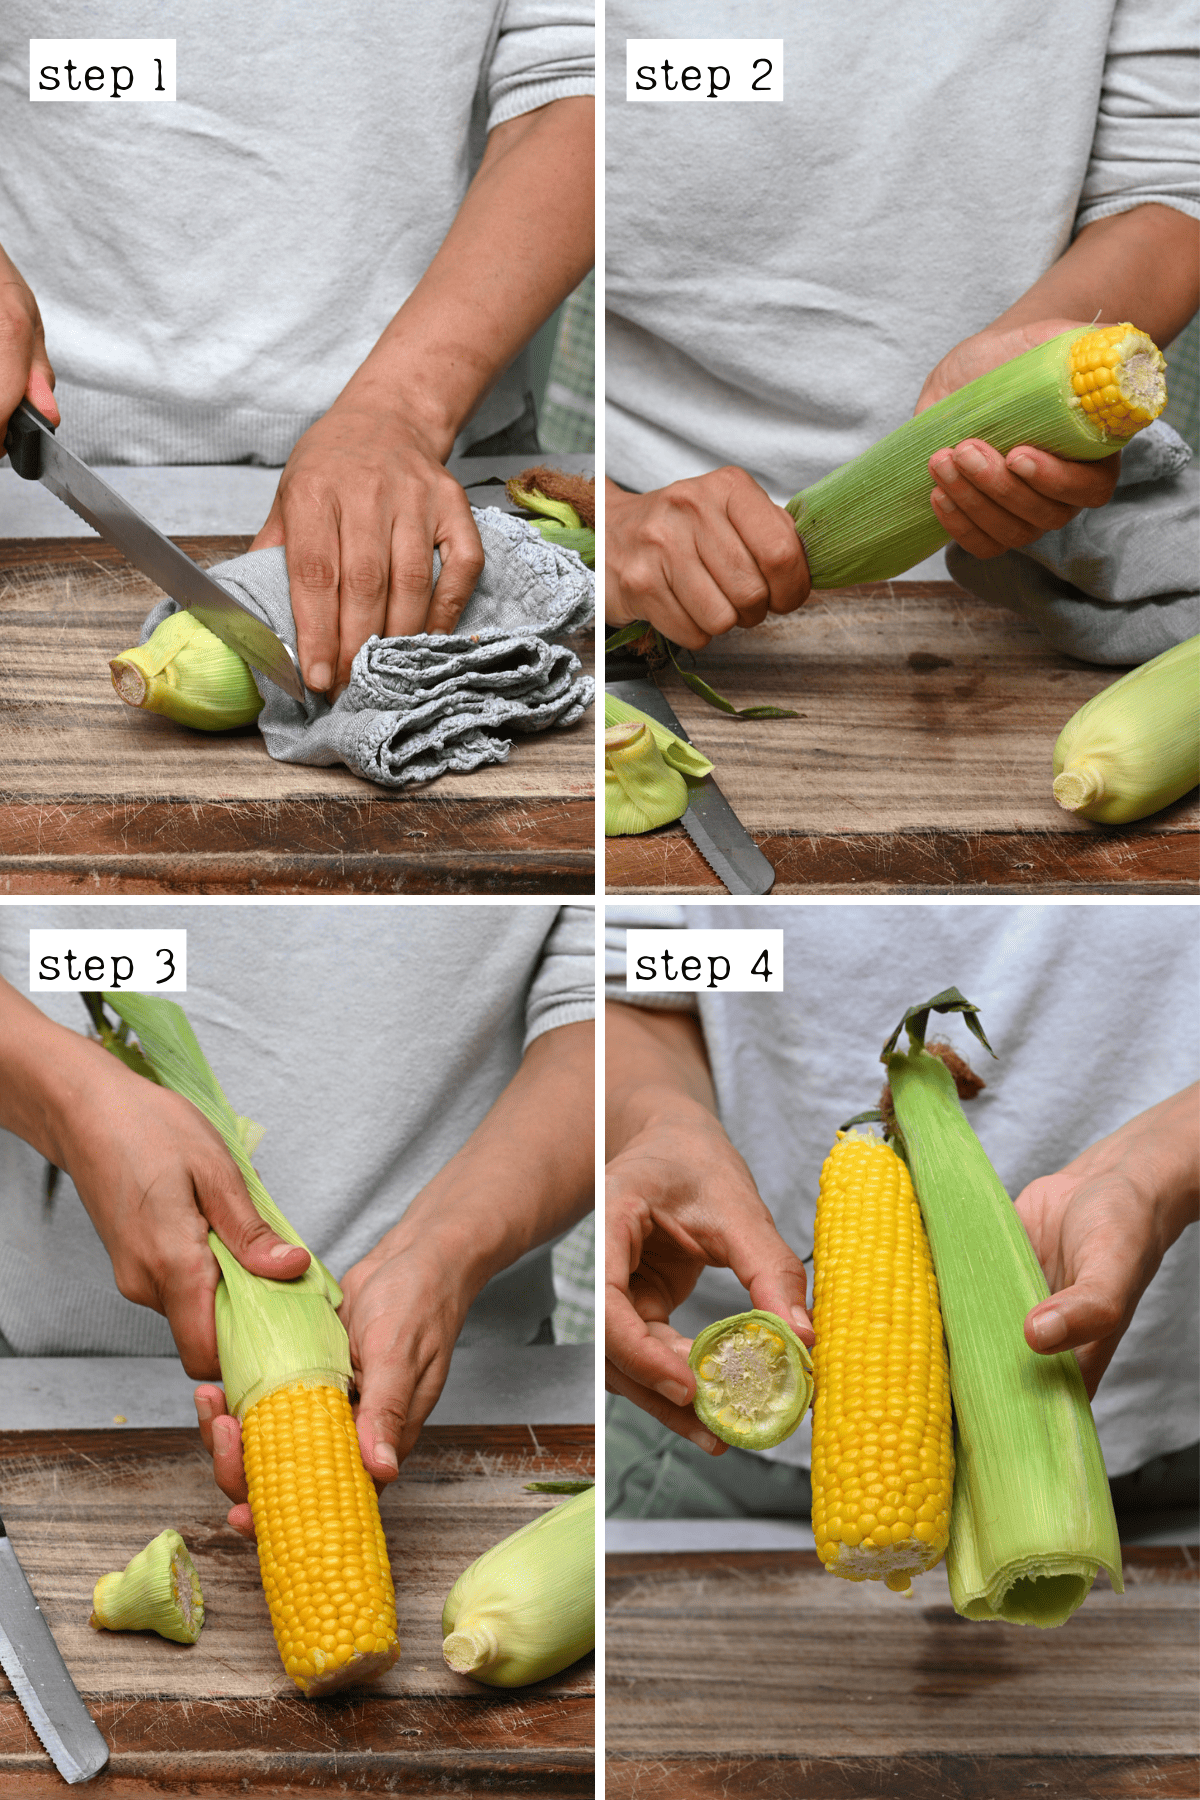 Steps for removing husk from microwaved corn